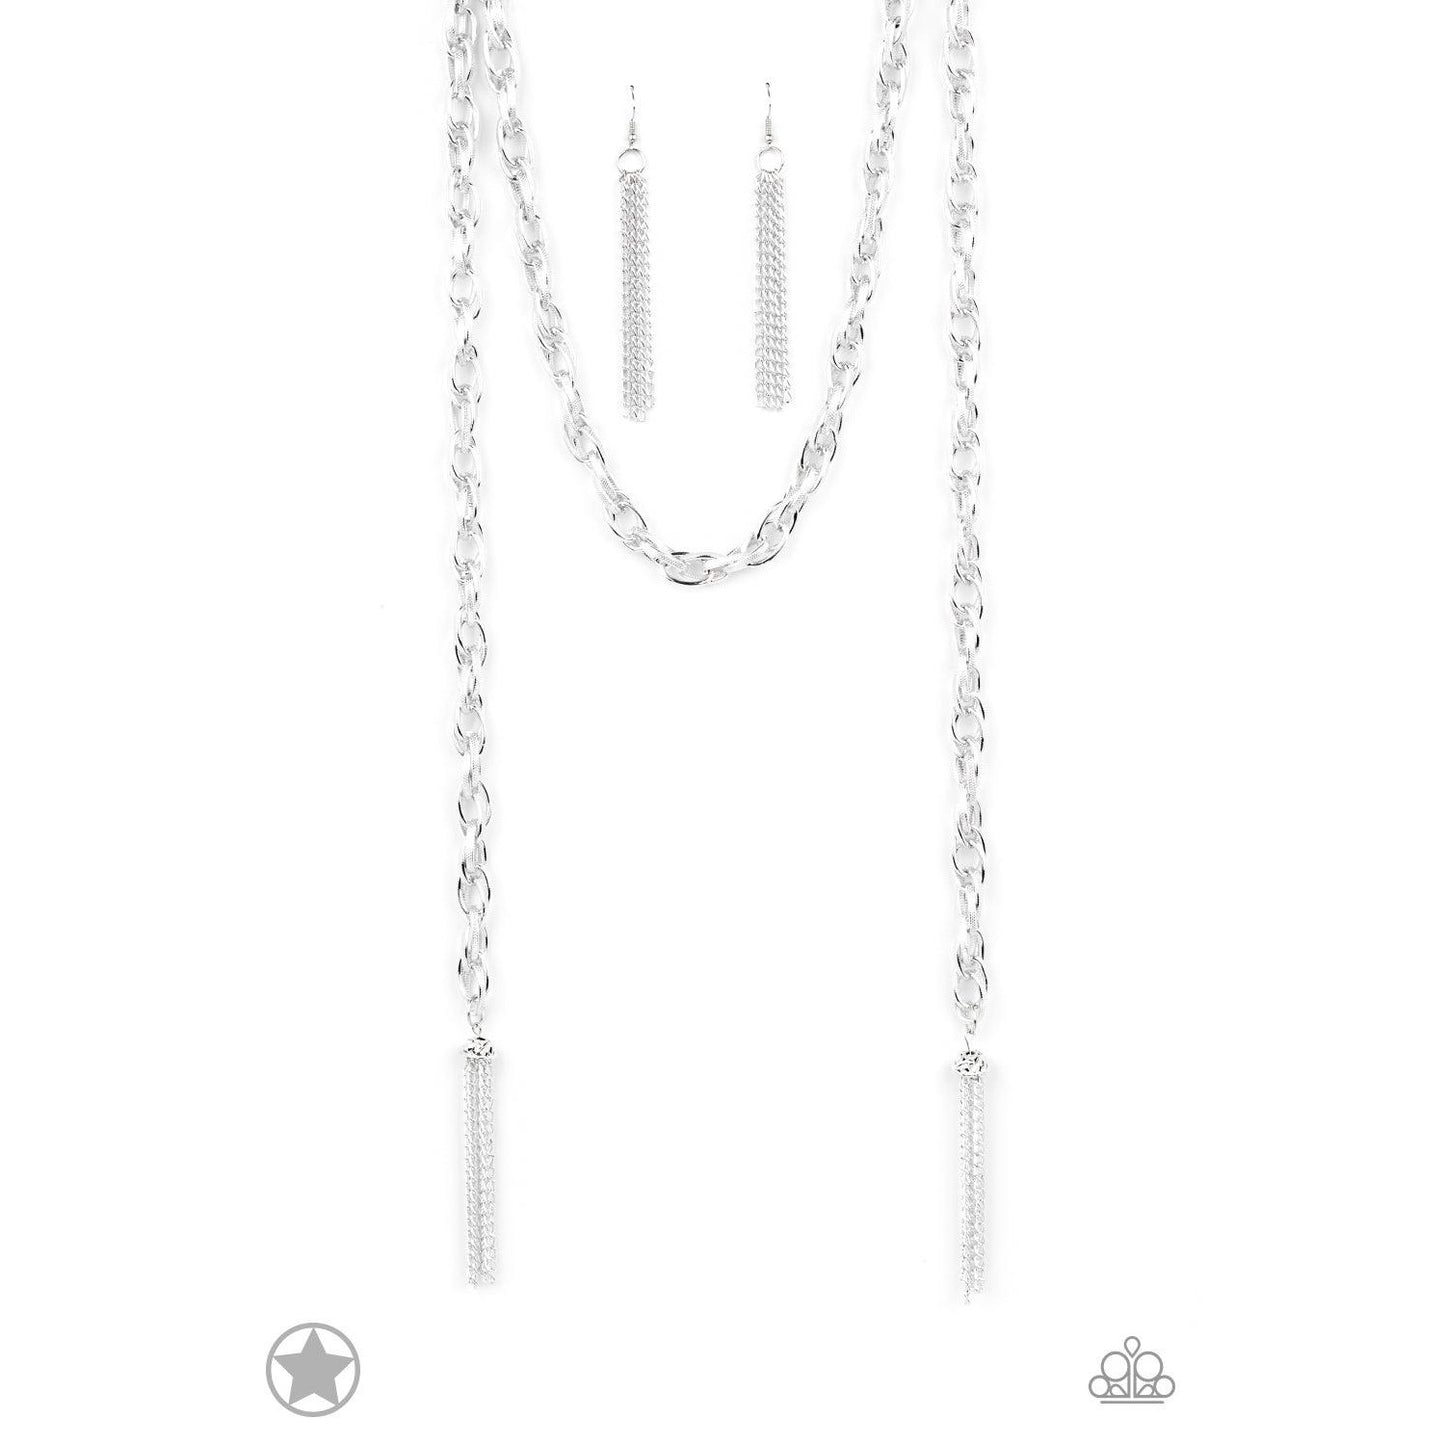 SCARFed for Attention - Silver Blockbuster Necklace - A Large Selection Hand-Chains And Jewelry On rainbowartsreview,Women's Jewelry | Necklaces, Earrings, Bracelets